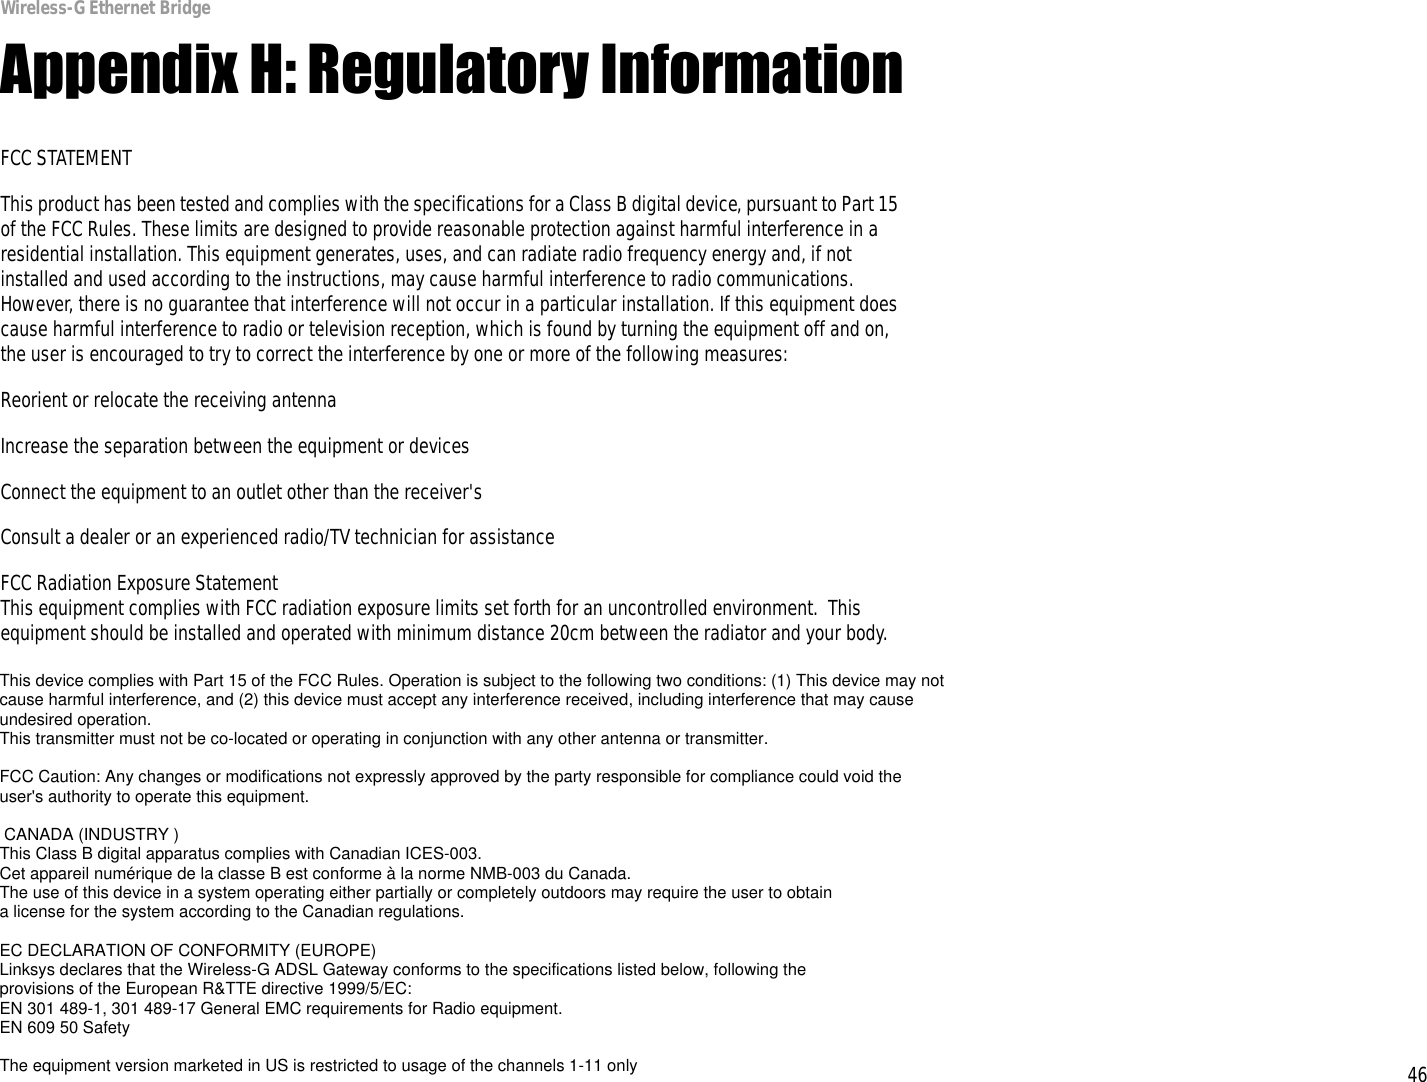 46Appendix H: Regulatory InformationWireless-G Ethernet BridgeAppendix H: Regulatory InformationFCC STATEMENTThis product has been tested and complies with the specifications for a Class B digital device, pursuant to Part 15 of the FCC Rules. These limits are designed to provide reasonable protection against harmful interference in a residential installation. This equipment generates, uses, and can radiate radio frequency energy and, if not installed and used according to the instructions, may cause harmful interference to radio communications. However, there is no guarantee that interference will not occur in a particular installation. If this equipment does cause harmful interference to radio or television reception, which is found by turning the equipment off and on, the user is encouraged to try to correct the interference by one or more of the following measures:Reorient or relocate the receiving antennaIncrease the separation between the equipment or devicesConnect the equipment to an outlet other than the receiver&apos;sConsult a dealer or an experienced radio/TV technician for assistanceFCC Radiation Exposure StatementThis equipment complies with FCC radiation exposure limits set forth for an uncontrolled environment.  This equipment should be installed and operated with minimum distance 20cm between the radiator and your body.INDUSTRY CANADA (CANADA)This Class B digital apparatus complies with Canadian ICES-003.Cet appareil numérique de la classe B est conforme à la norme NMB-003 du Canada.The use of this device in a system operating either partially or completely outdoors may require the user to obtain a license for the system according to the Canadian regulations.EC DECLARATION OF CONFORMITY (EUROPE)Linksys declares that the Wireless-G ADSL Gateway conforms to the specifications listed below, following the provisions of the European R&amp;TTE directive 1999/5/EC: EN 301 489-1, 301 489-17 General EMC requirements for Radio equipment.EN 609 50 SafetyThis device complies with Part 15 of the FCC Rules. Operation is subject to the following two conditions: (1) This device may not cause harmful interference, and (2) this device must accept any interference received, including interference that may cause undesired operation.This transmitter must not be co-located or operating in conjunction with any other antenna or transmitter.FCC Caution: Any changes or modifications not expressly approved by the party responsible for compliance could void the user&apos;s authority to operate this equipment. CANADA (INDUSTRY )This Class B digital apparatus complies with Canadian ICES-003.Cet appareil numérique de la classe B est conforme à la norme NMB-003 du Canada.The use of this device in a system operating either partially or completely outdoors may require the user to obtaina license for the system according to the Canadian regulations.EC DECLARATION OF CONFORMITY (EUROPE)Linksys declares that the Wireless-G ADSL Gateway conforms to the specifications listed below, following theprovisions of the European R&amp;TTE directive 1999/5/EC:EN 301 489-1, 301 489-17 General EMC requirements for Radio equipment.EN 609 50 SafetyThe equipment version marketed in US is restricted to usage of the channels 1-11 only